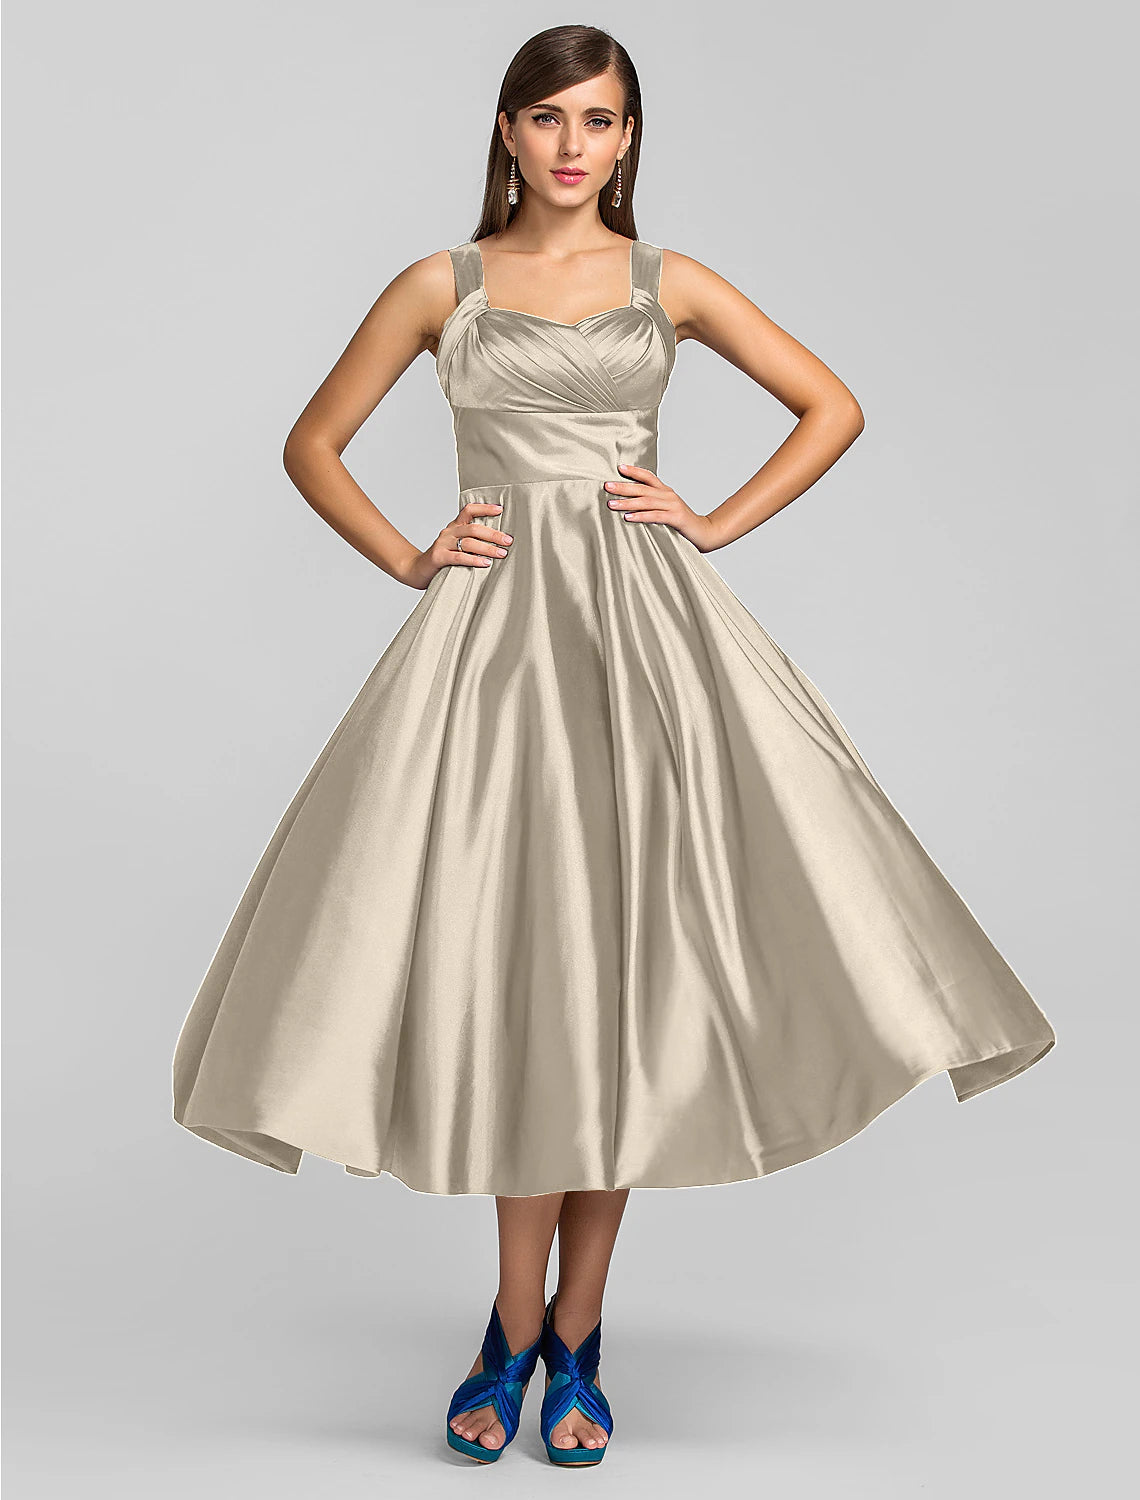 A-Line Minimalist Dress Wedding Guest Cocktail Party Tea Length Sleeveless Square Neck Stretch Satin with Criss